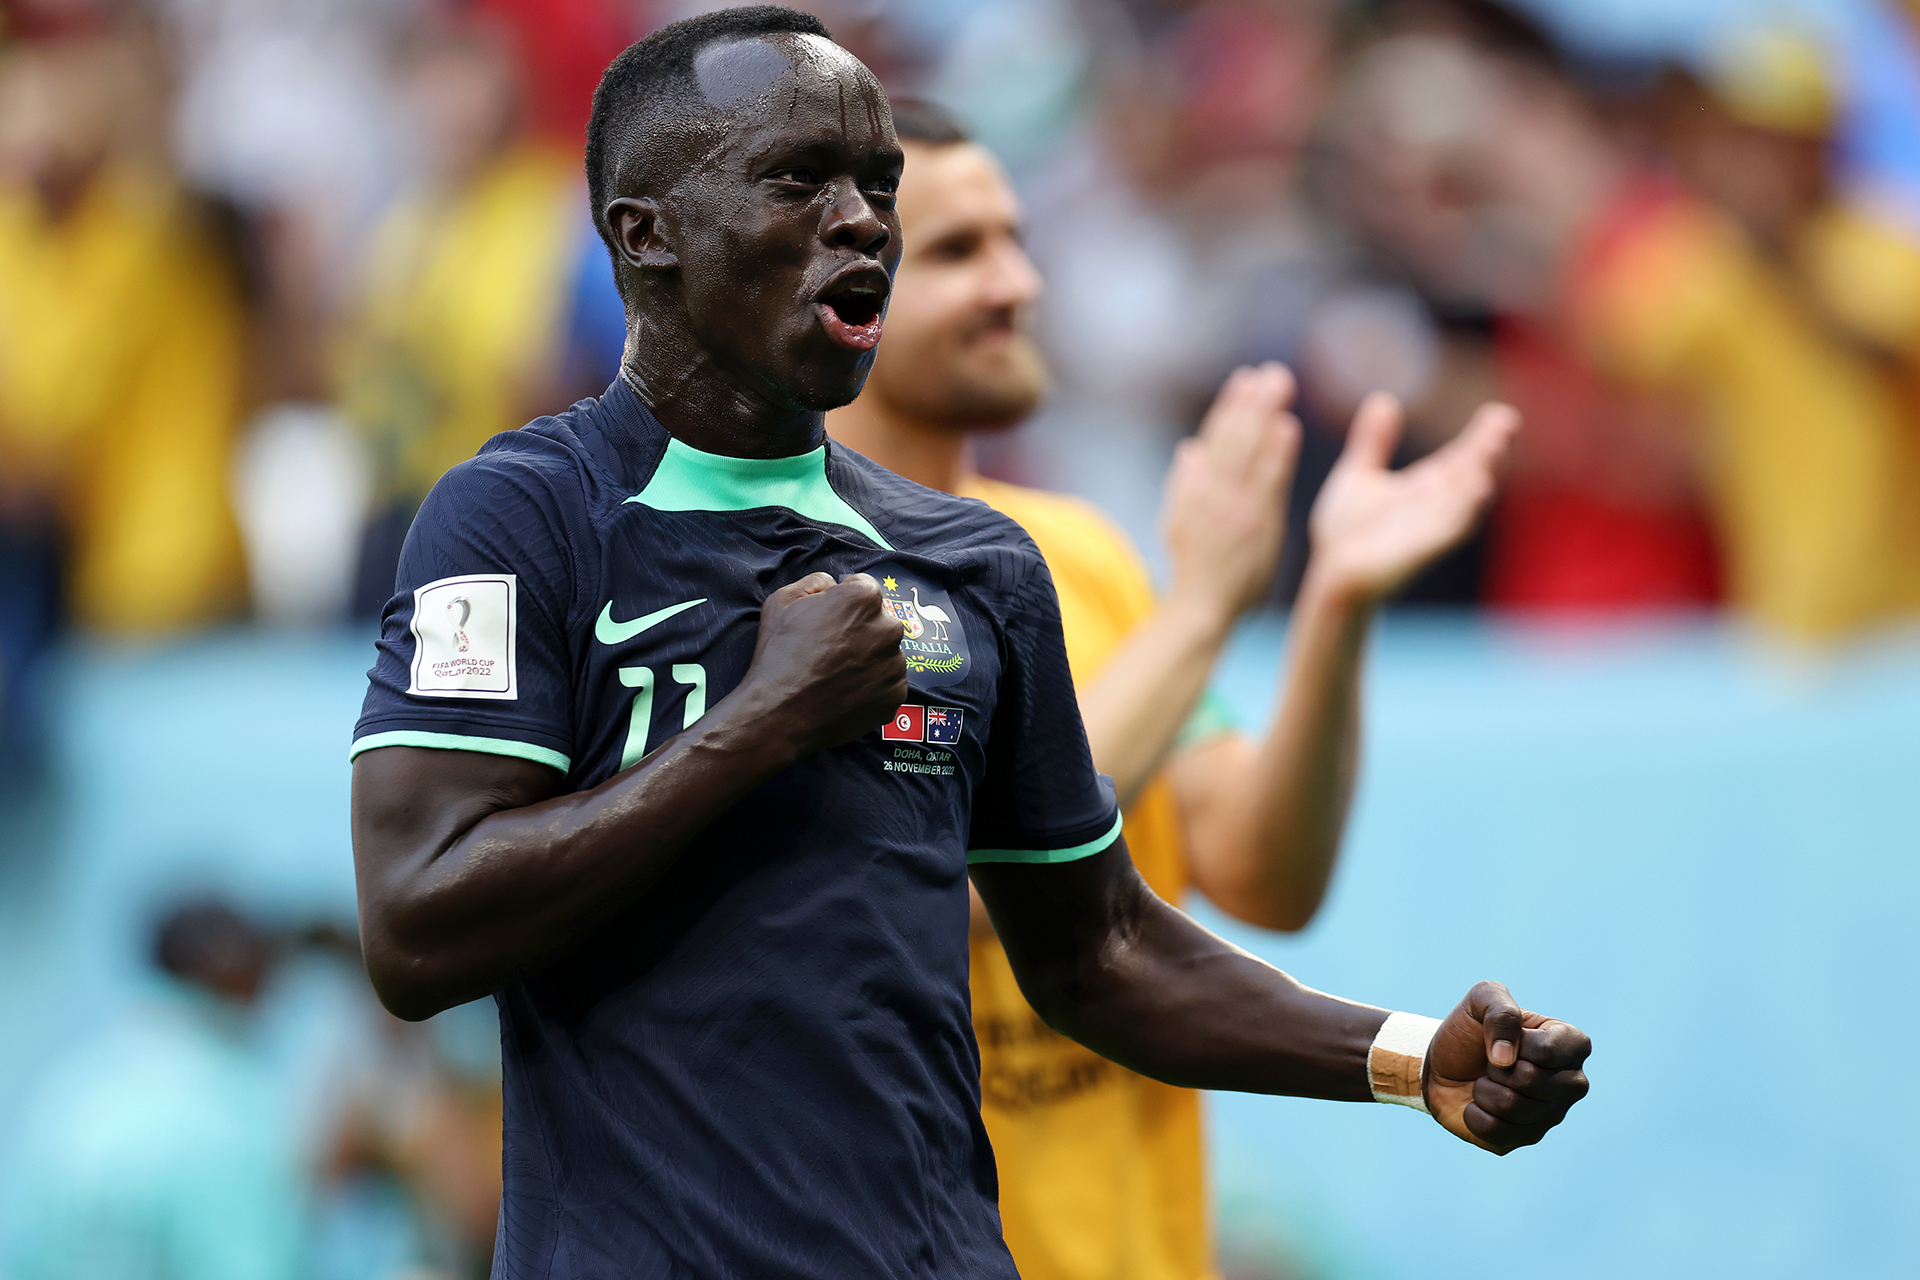 Awer Mabil celebrates after the Socceroos defeated Tunisia at the FIFA World Cup Qatar 2022